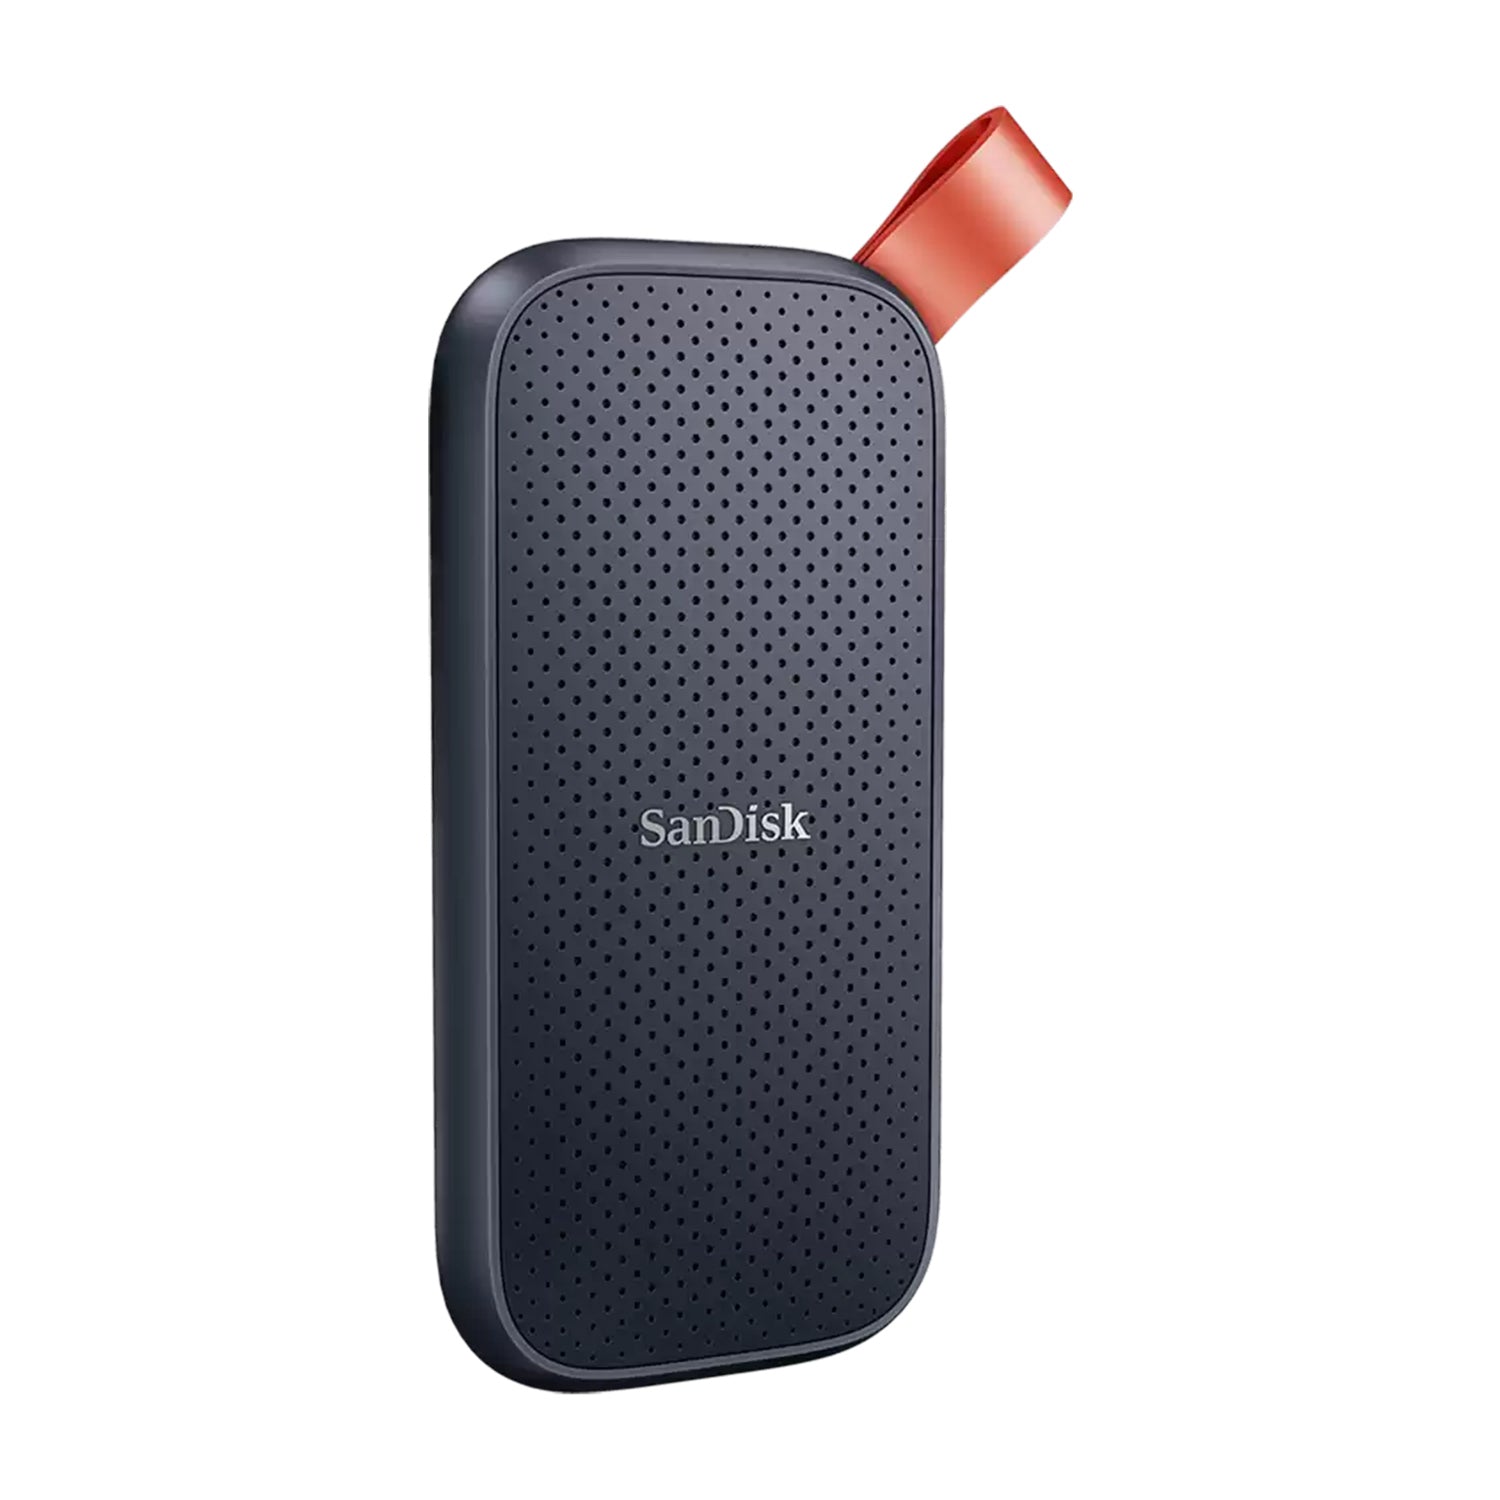 Sandisk Portable SSD 2TB up to 520MB/S Read speed USB 3.2 Gen 2 – Black